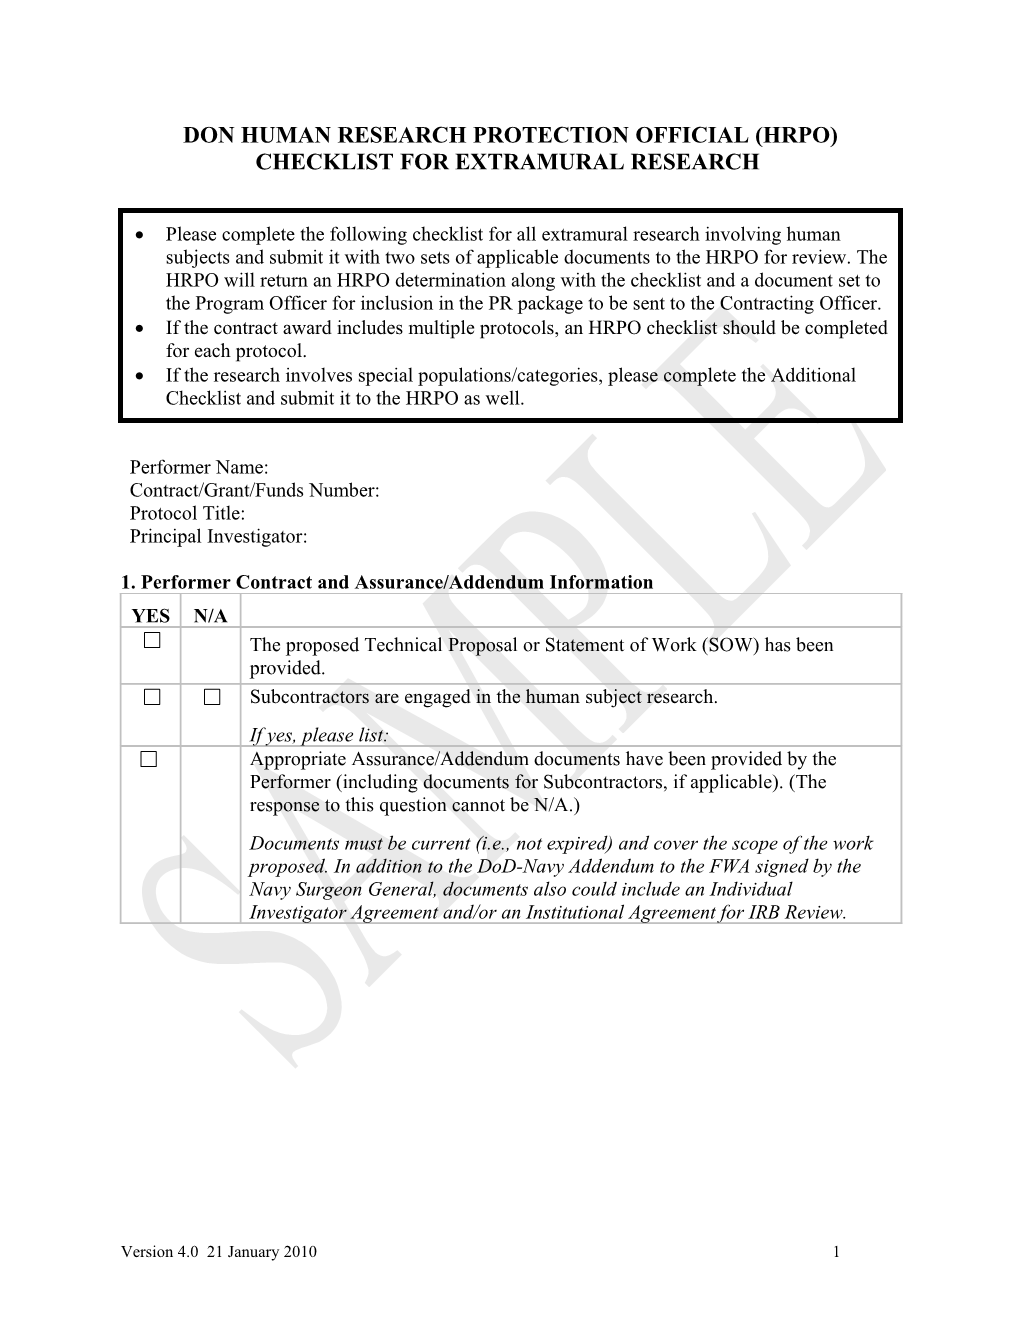 DON Human Research Protection Official (HRPO)Checklist for EXTRAMURAL RESEARCH